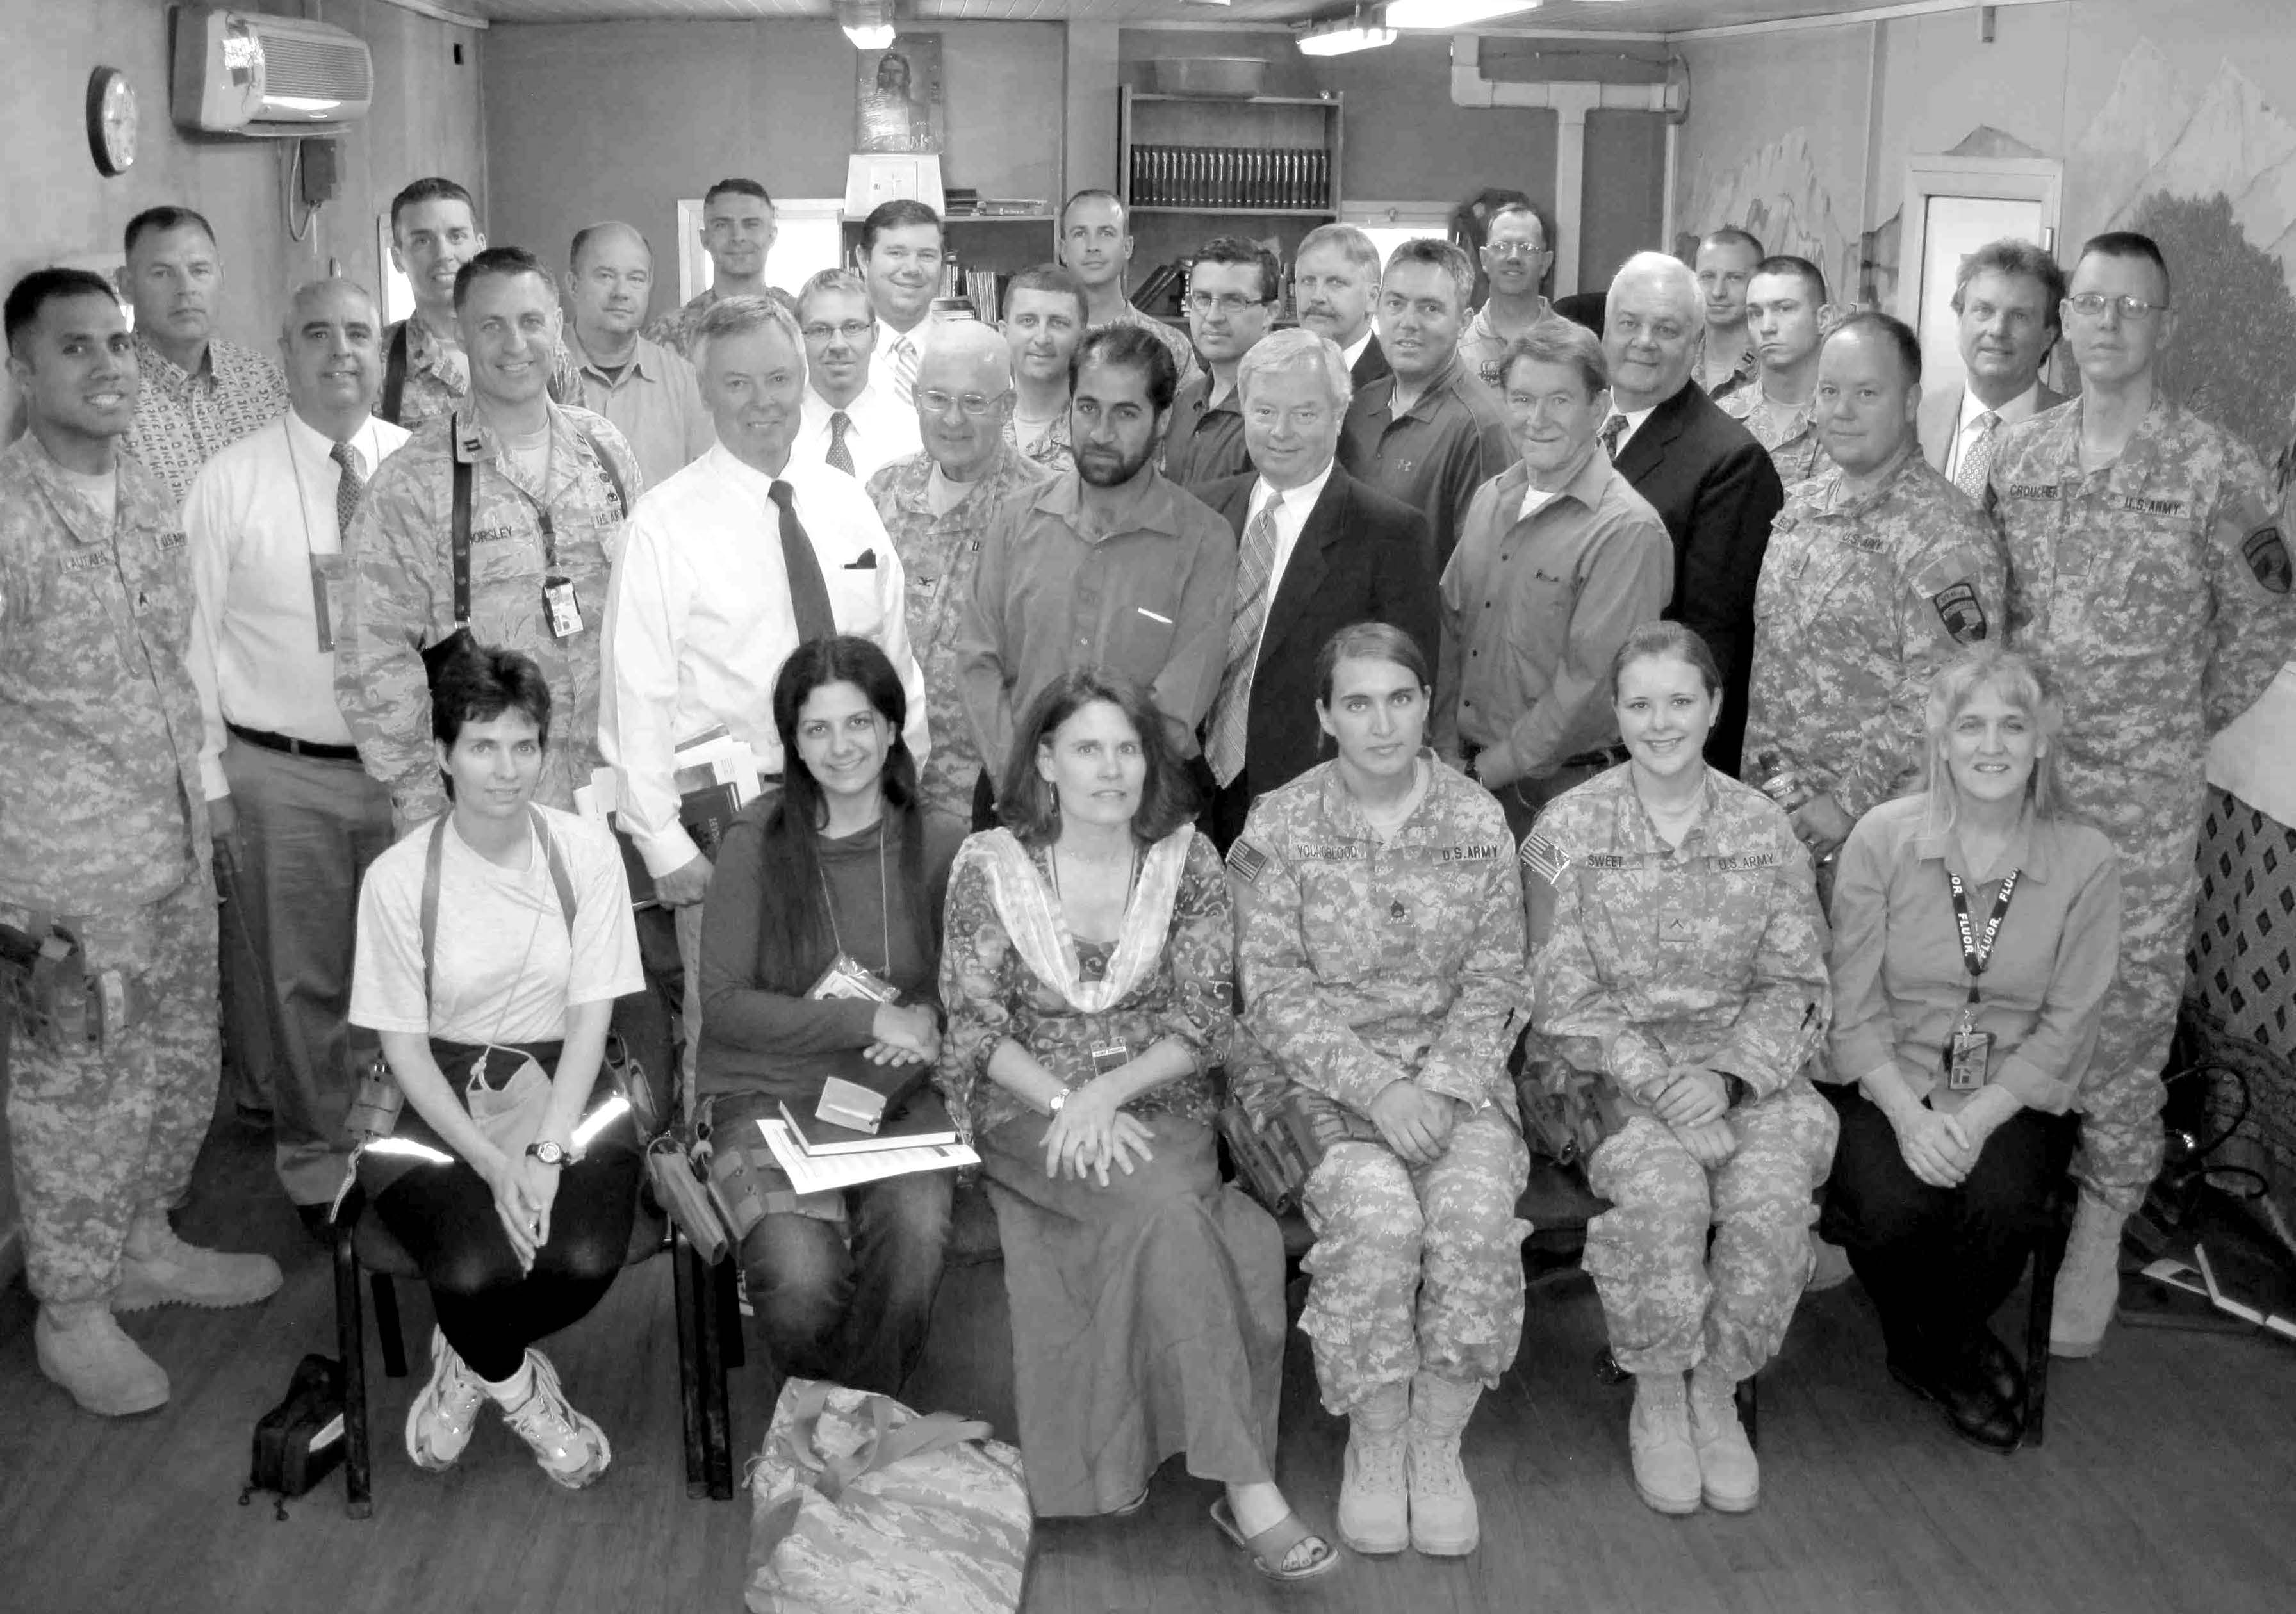 Members of the Kabul Military Branch after attending sacrament meeting on May 28, 2010. Branch members included U.S. military personnel doctors, lawyers, diplomatic personnel, contractors, nongovernment aid workers, and two American executive television producers for Channel One (Afghan television station). Courtesy of Eugene J. Wikle.